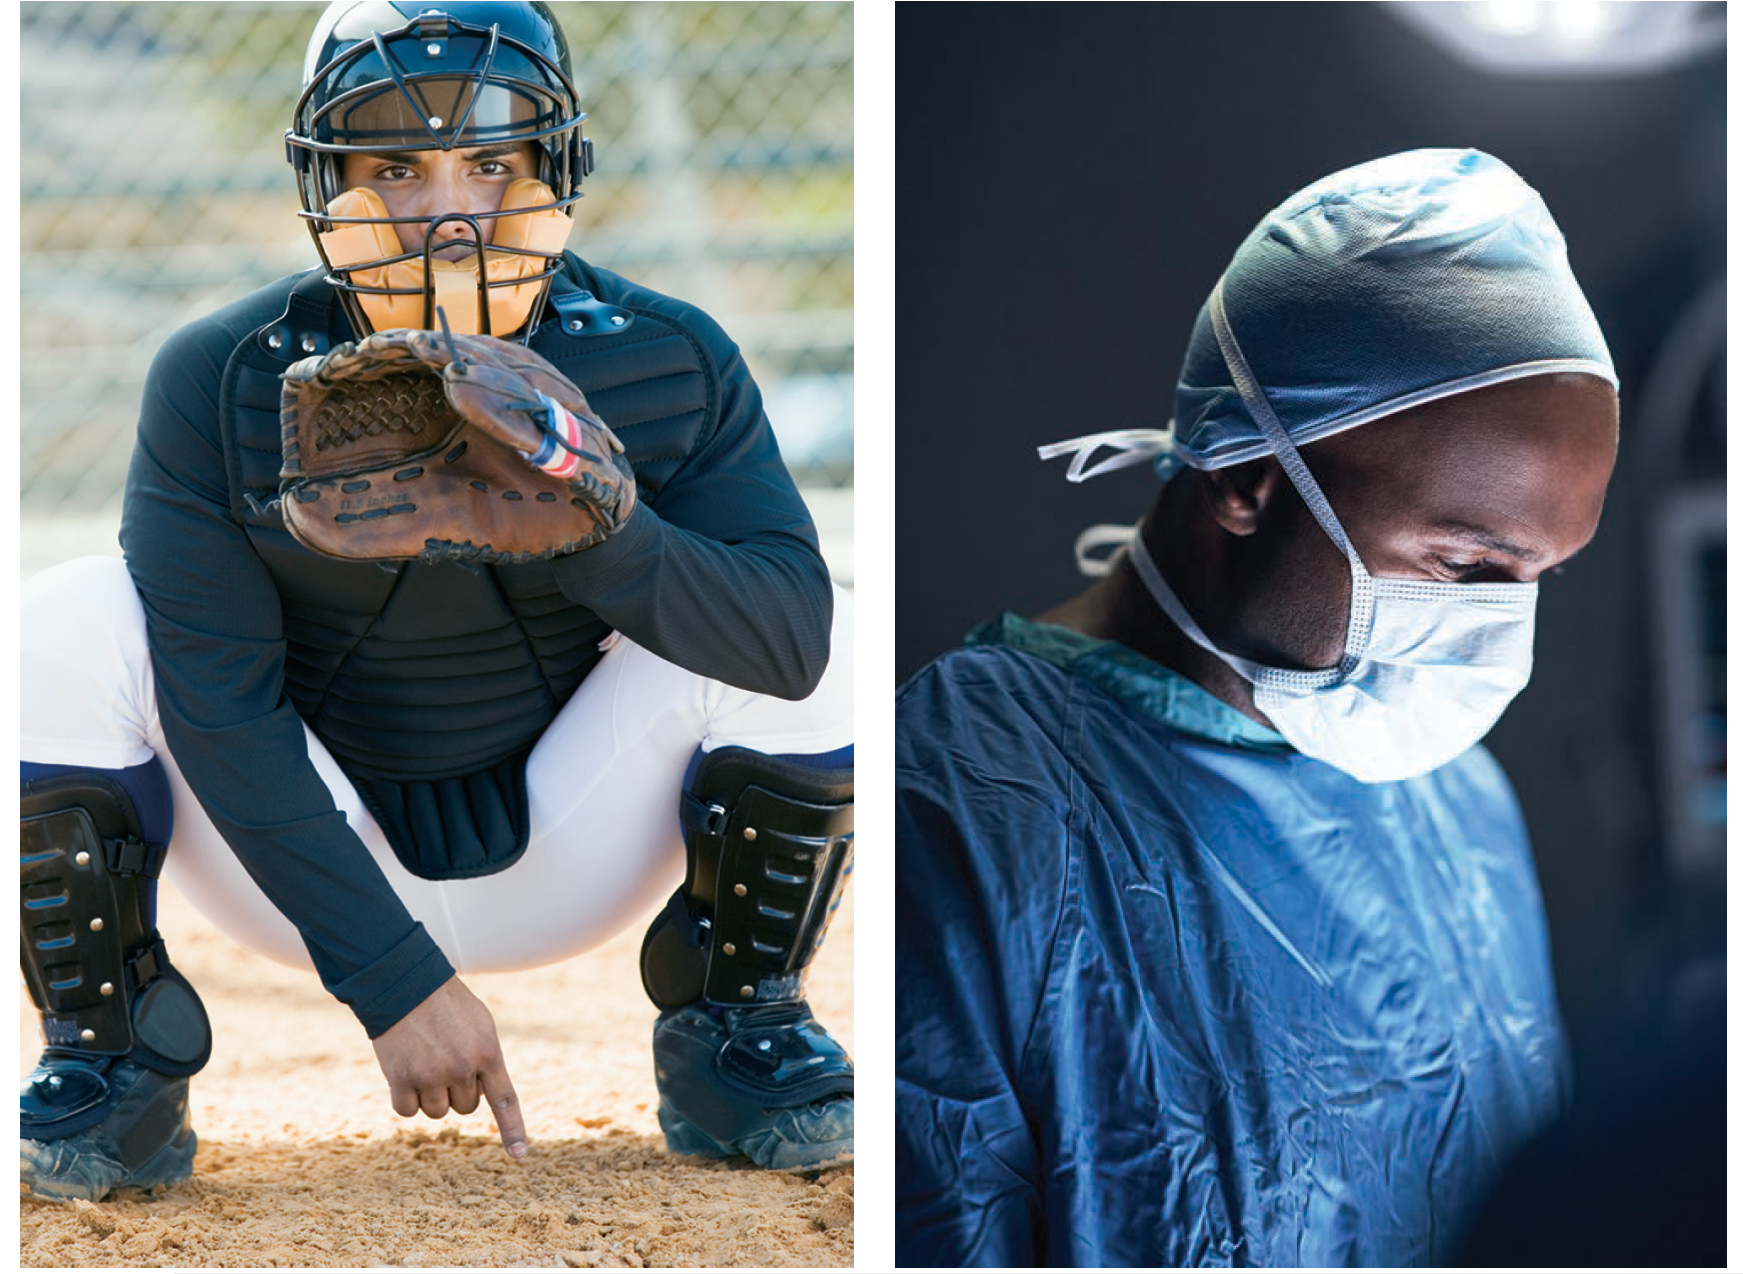 Baseball catcher (left) and doctor wearing surgical clothing (right).